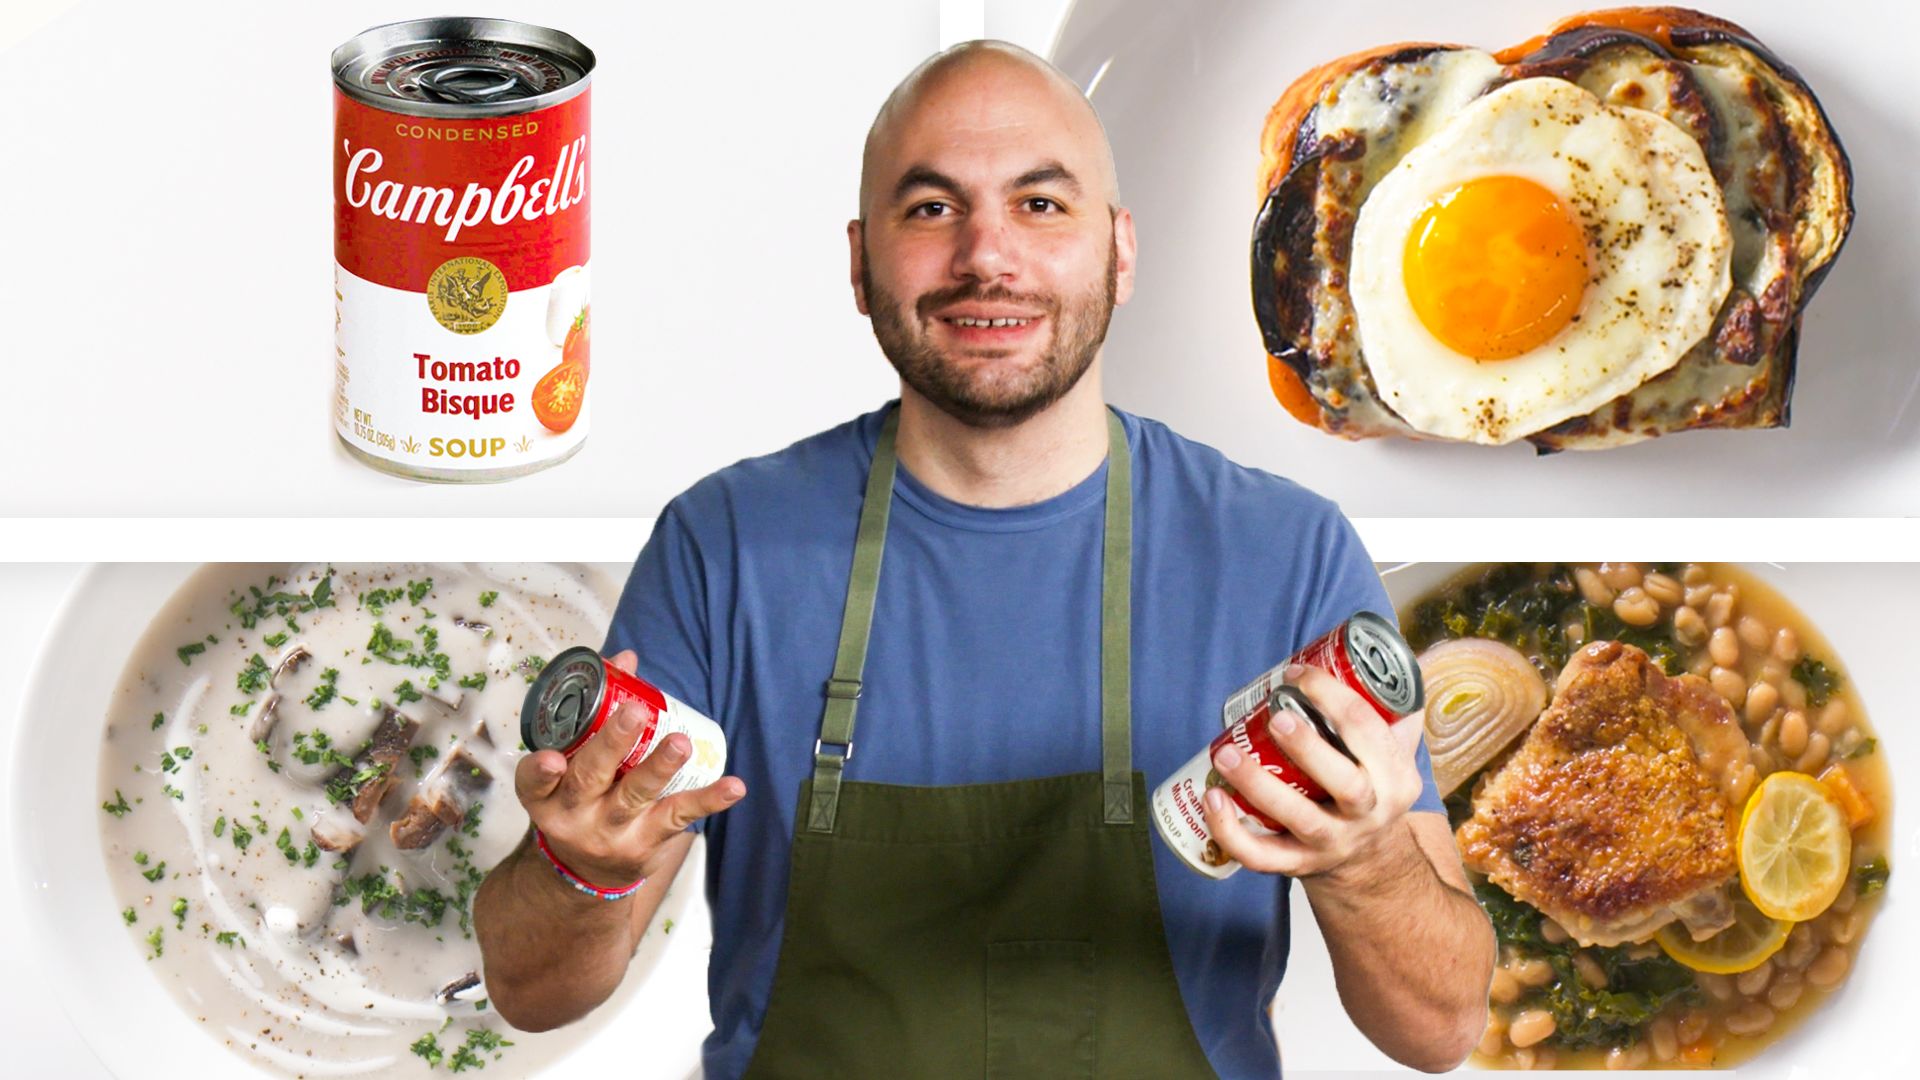 Watch Pro Chef Turns Canned Soup Into 3 Meals For Under $9, The Smart Cook